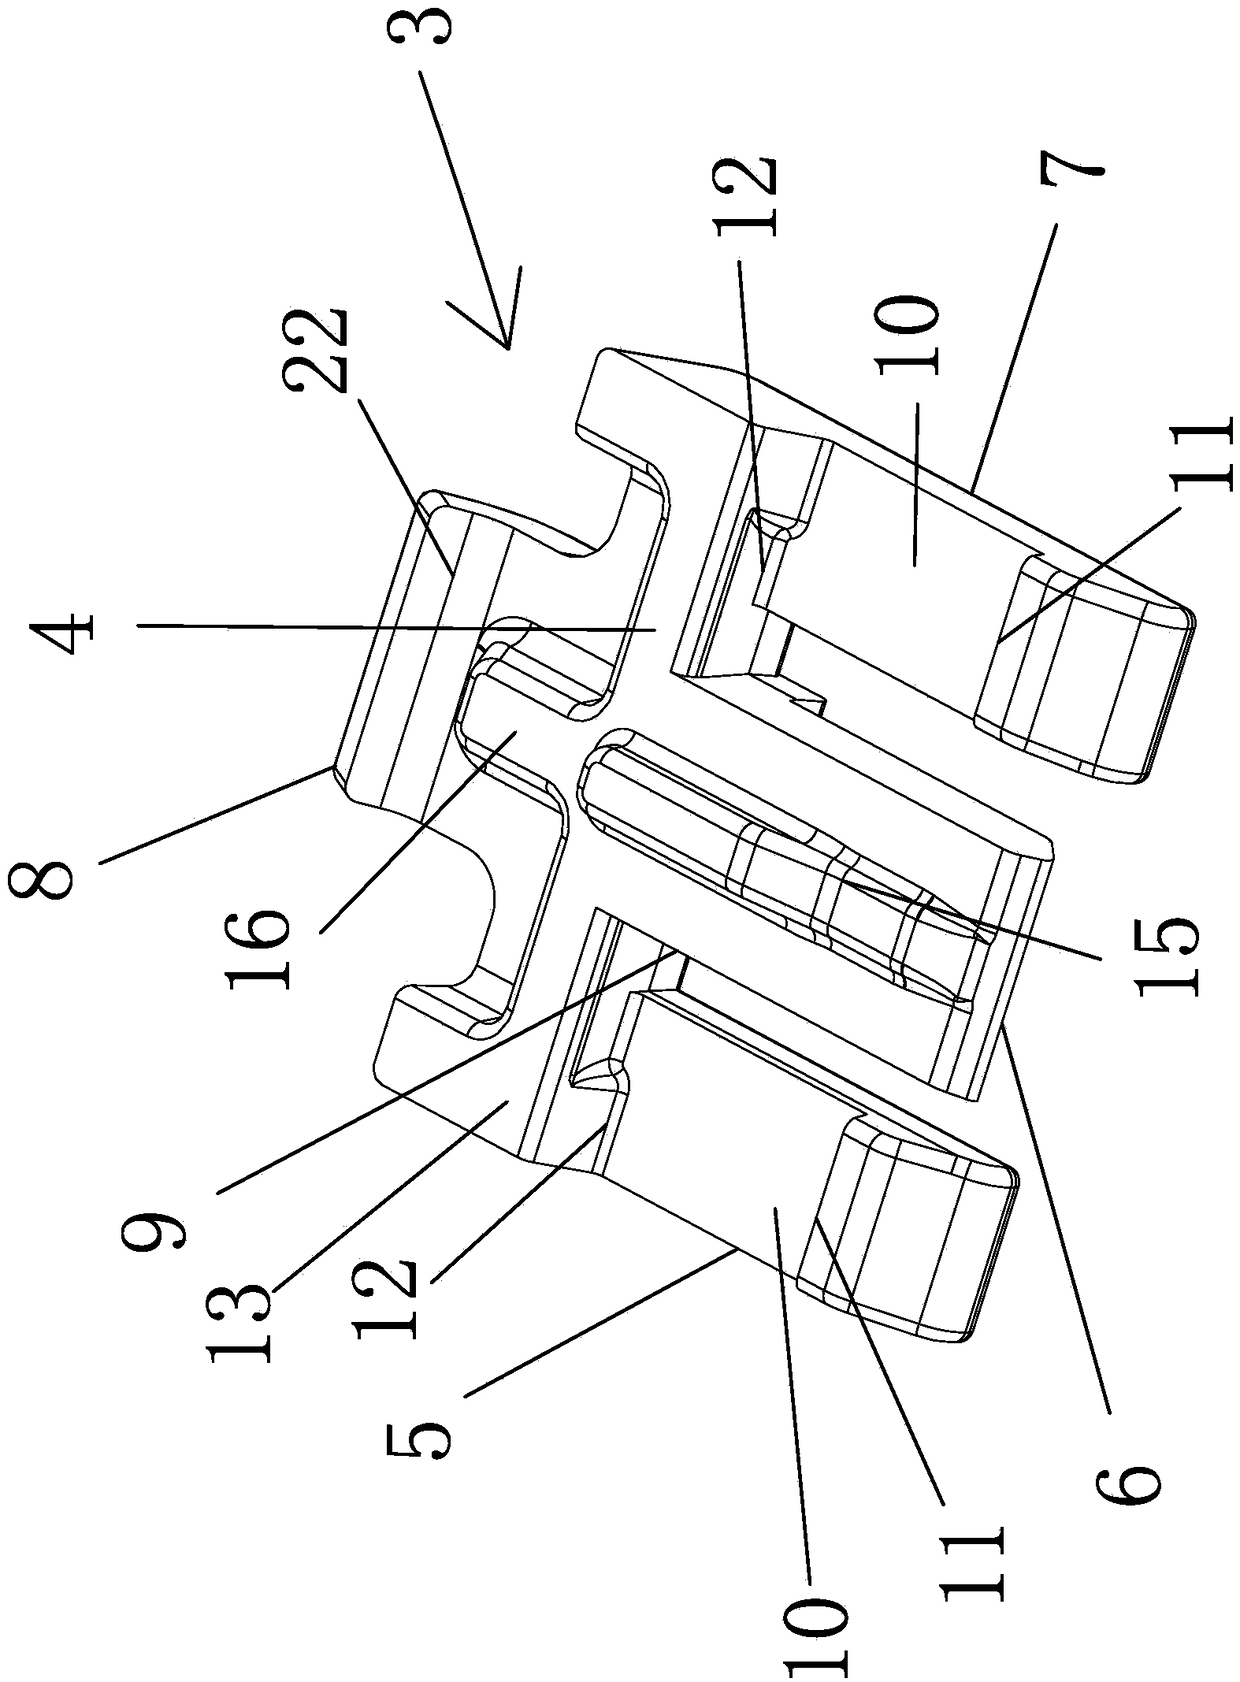 A connecting clasp structure of an automobile cover plate type part body and a bright bar